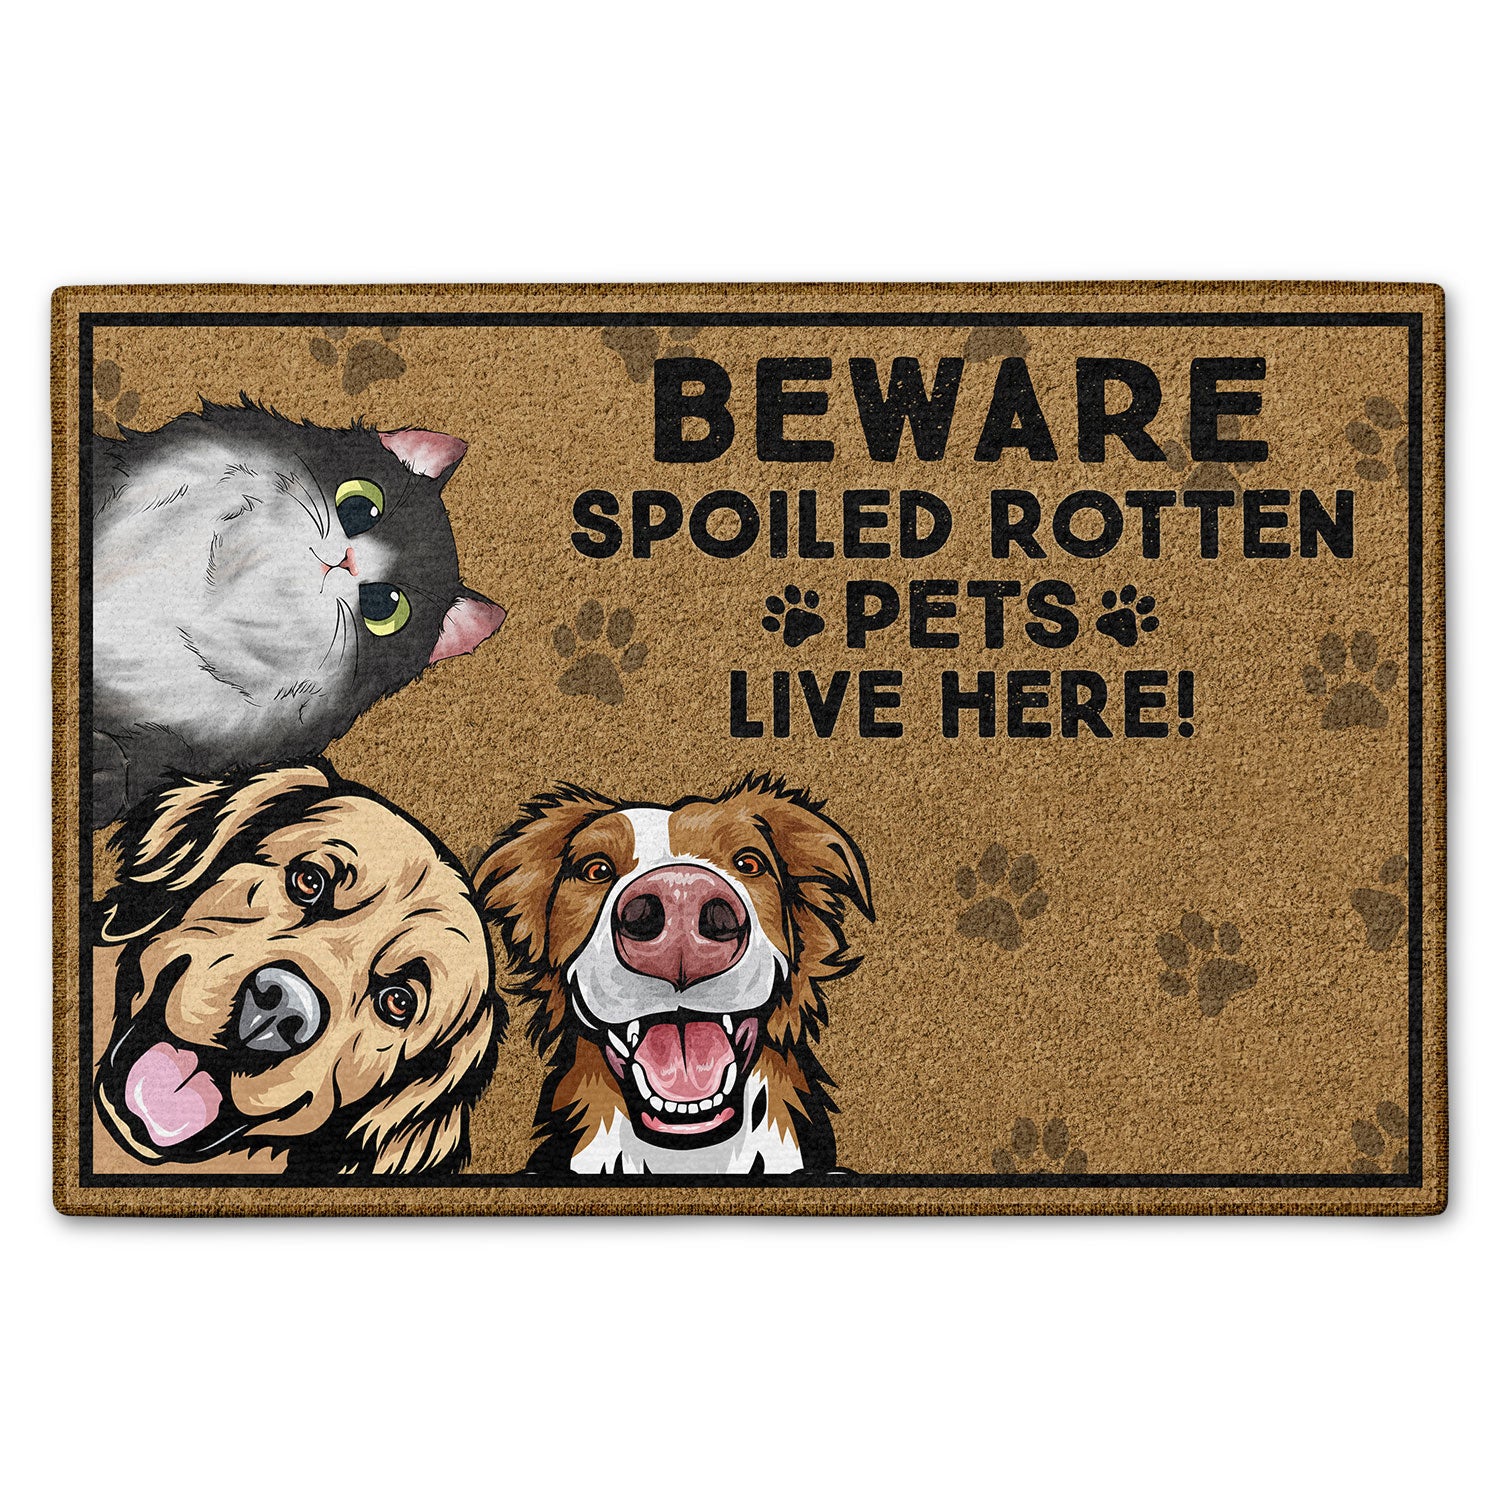 Beware Spoiled Rotten Dogs Live Here - Home Decor, Birthday, Housewarming Gift For Dog Lovers & Cat Lovers - Personalized Custom Doormat